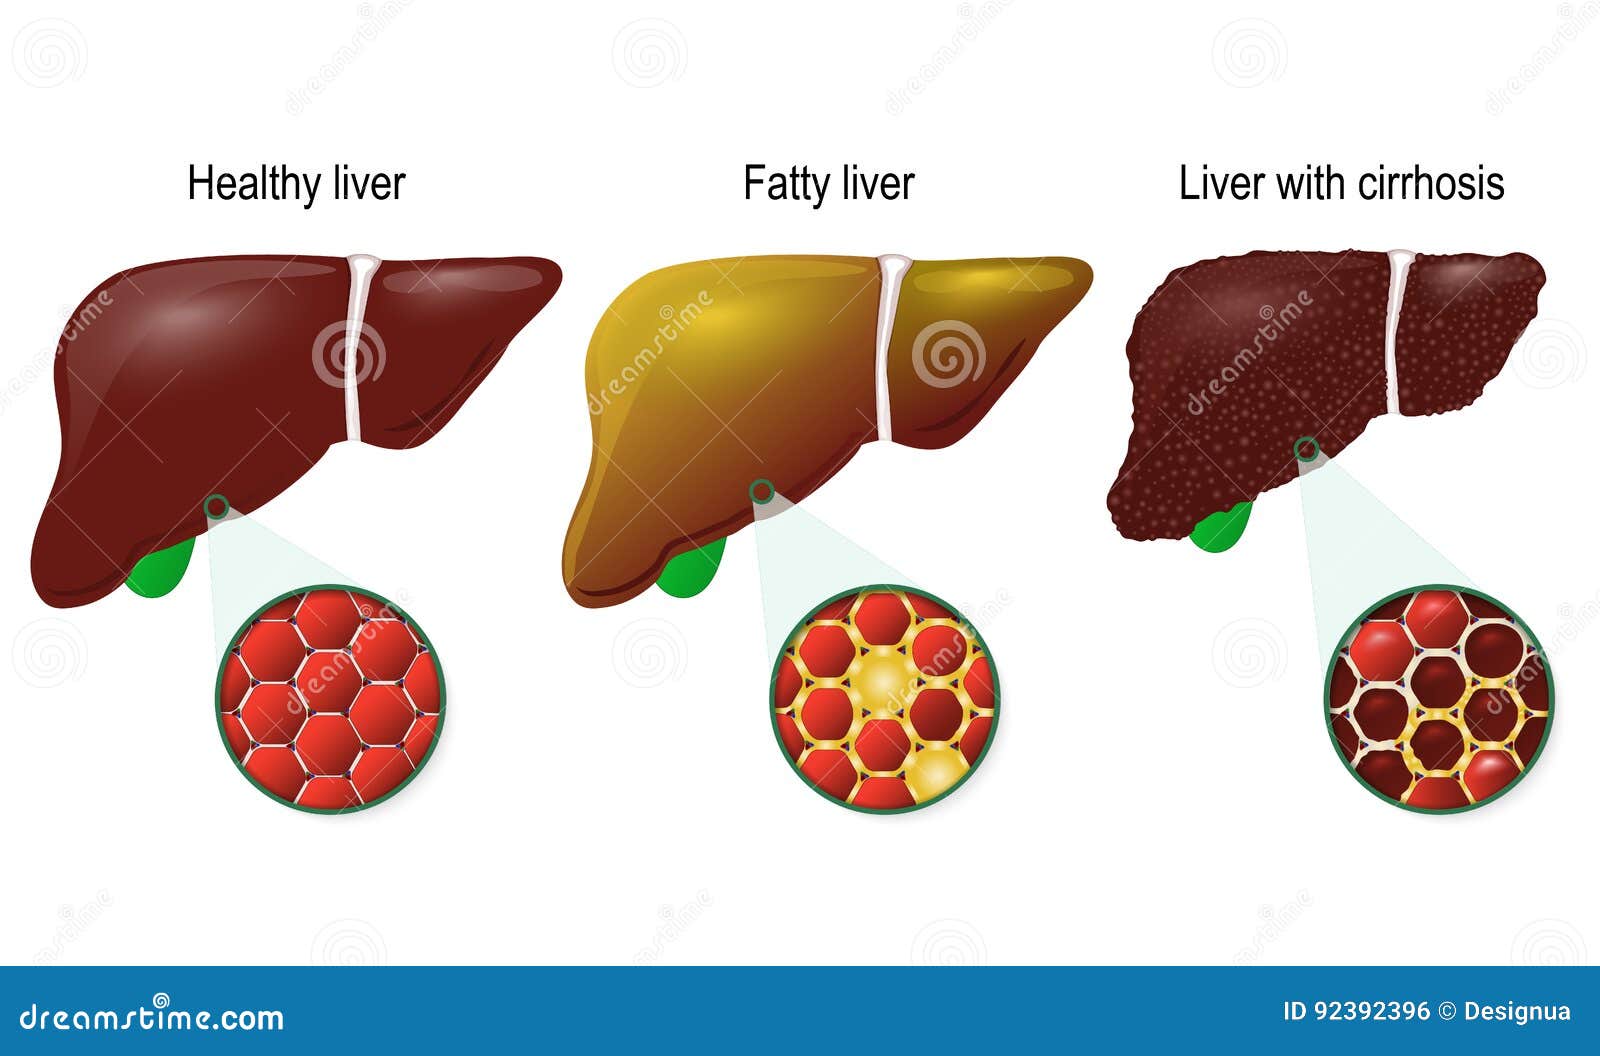 healthy, fatty and cirrhosis of the liver